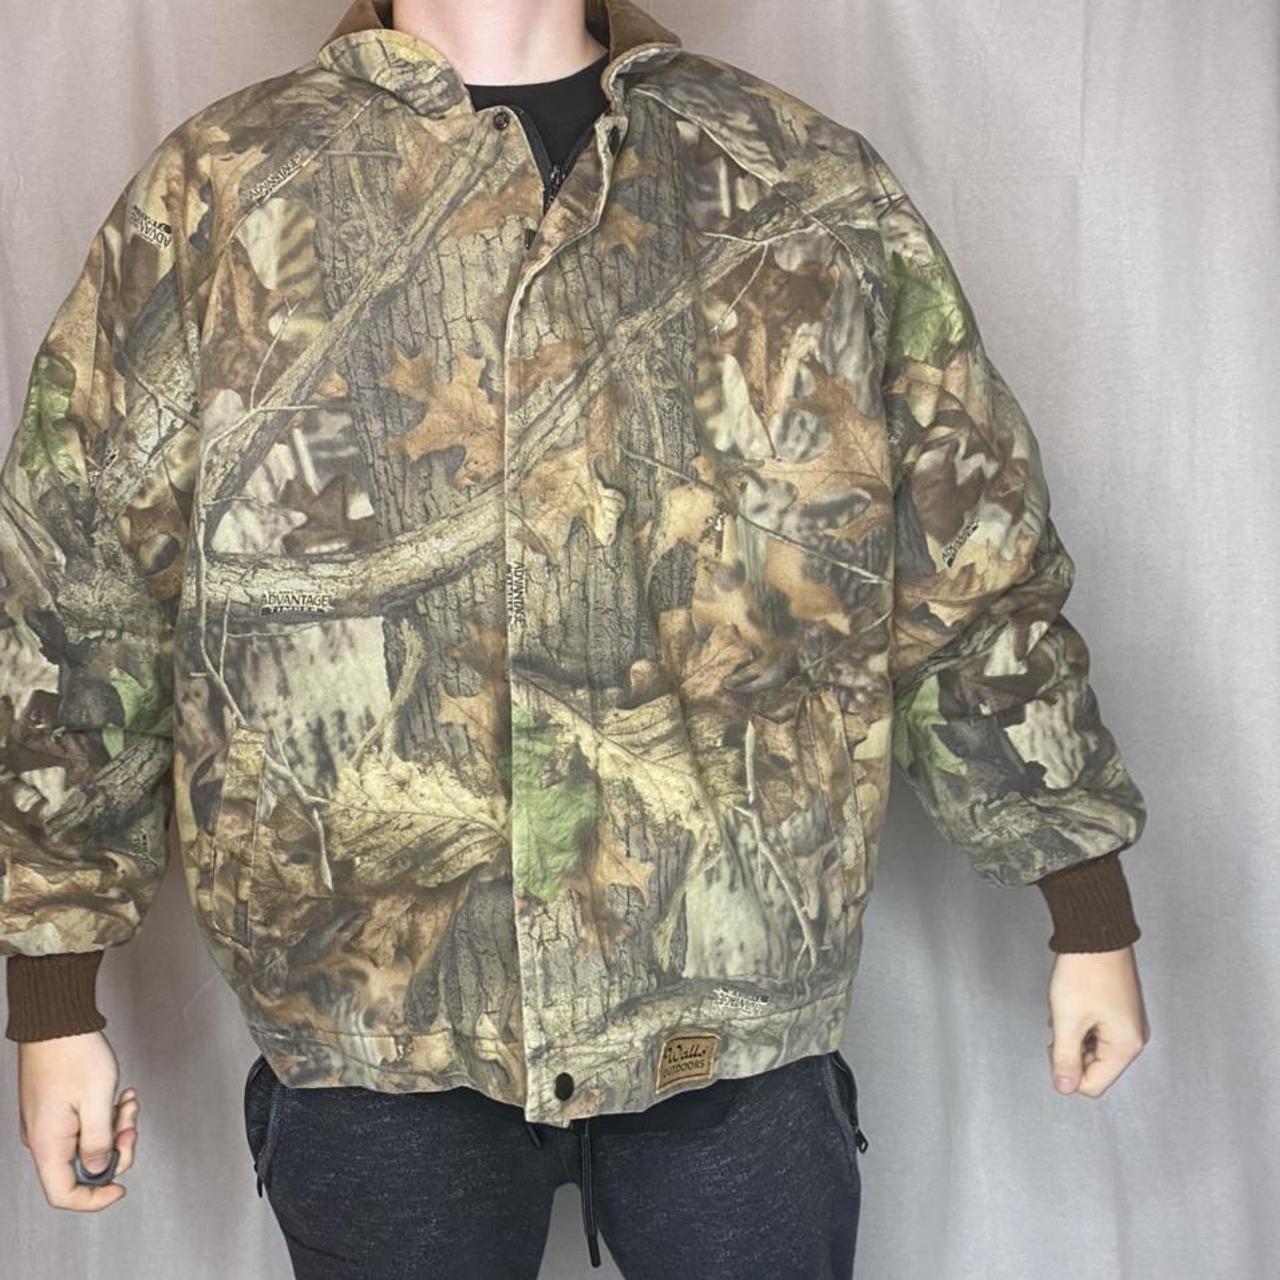 Product Image 2 - Walls Outdoor Camo hunting Coat

🪐Condition